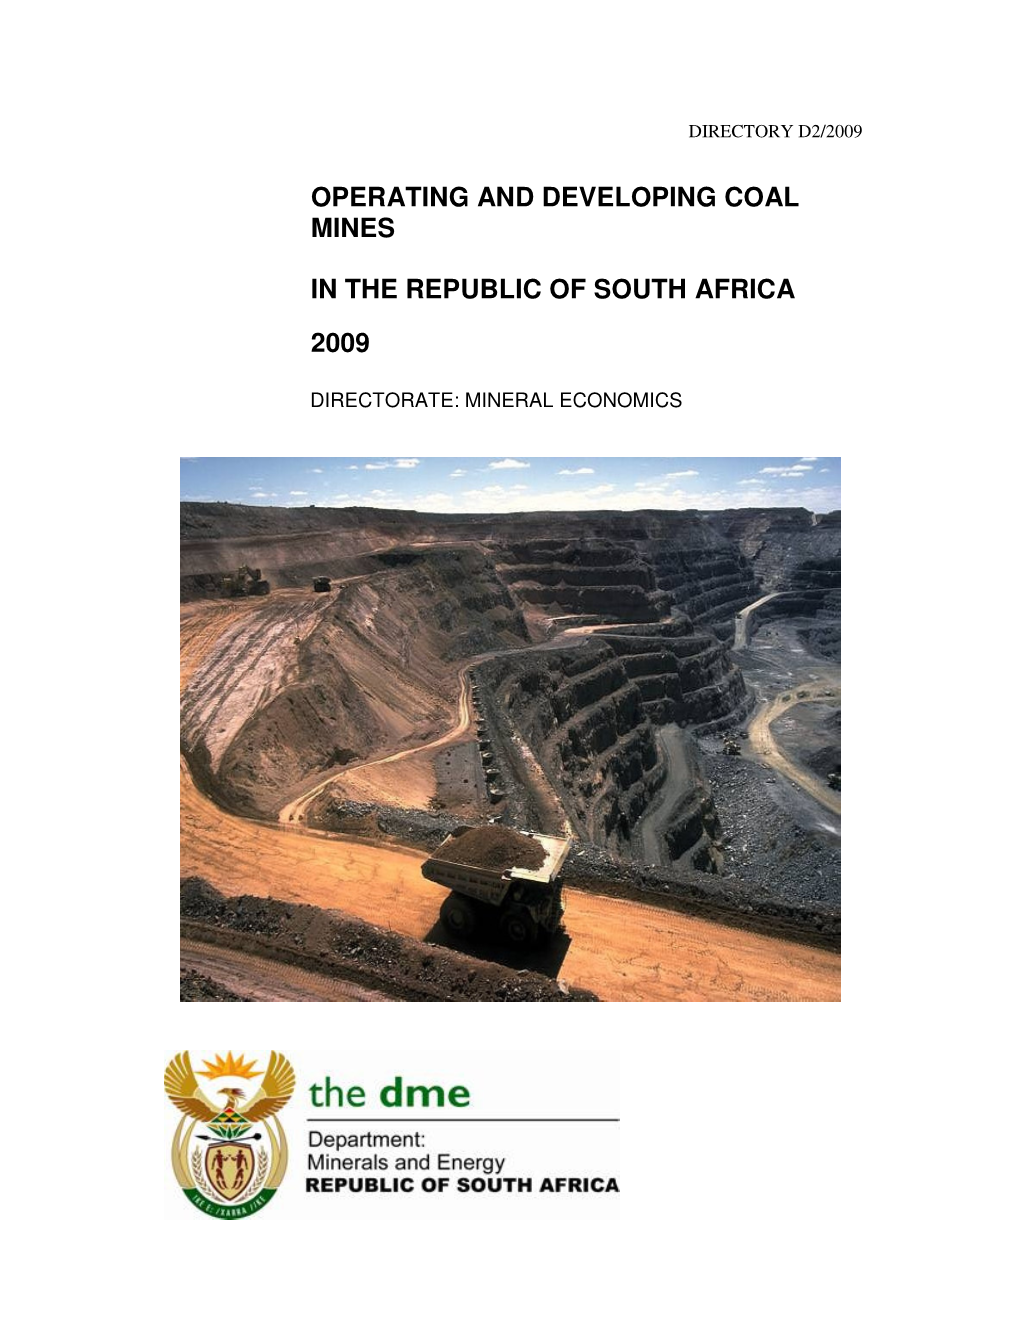 Operating and Developing Coal Mines in the Republic of South Africa 2009